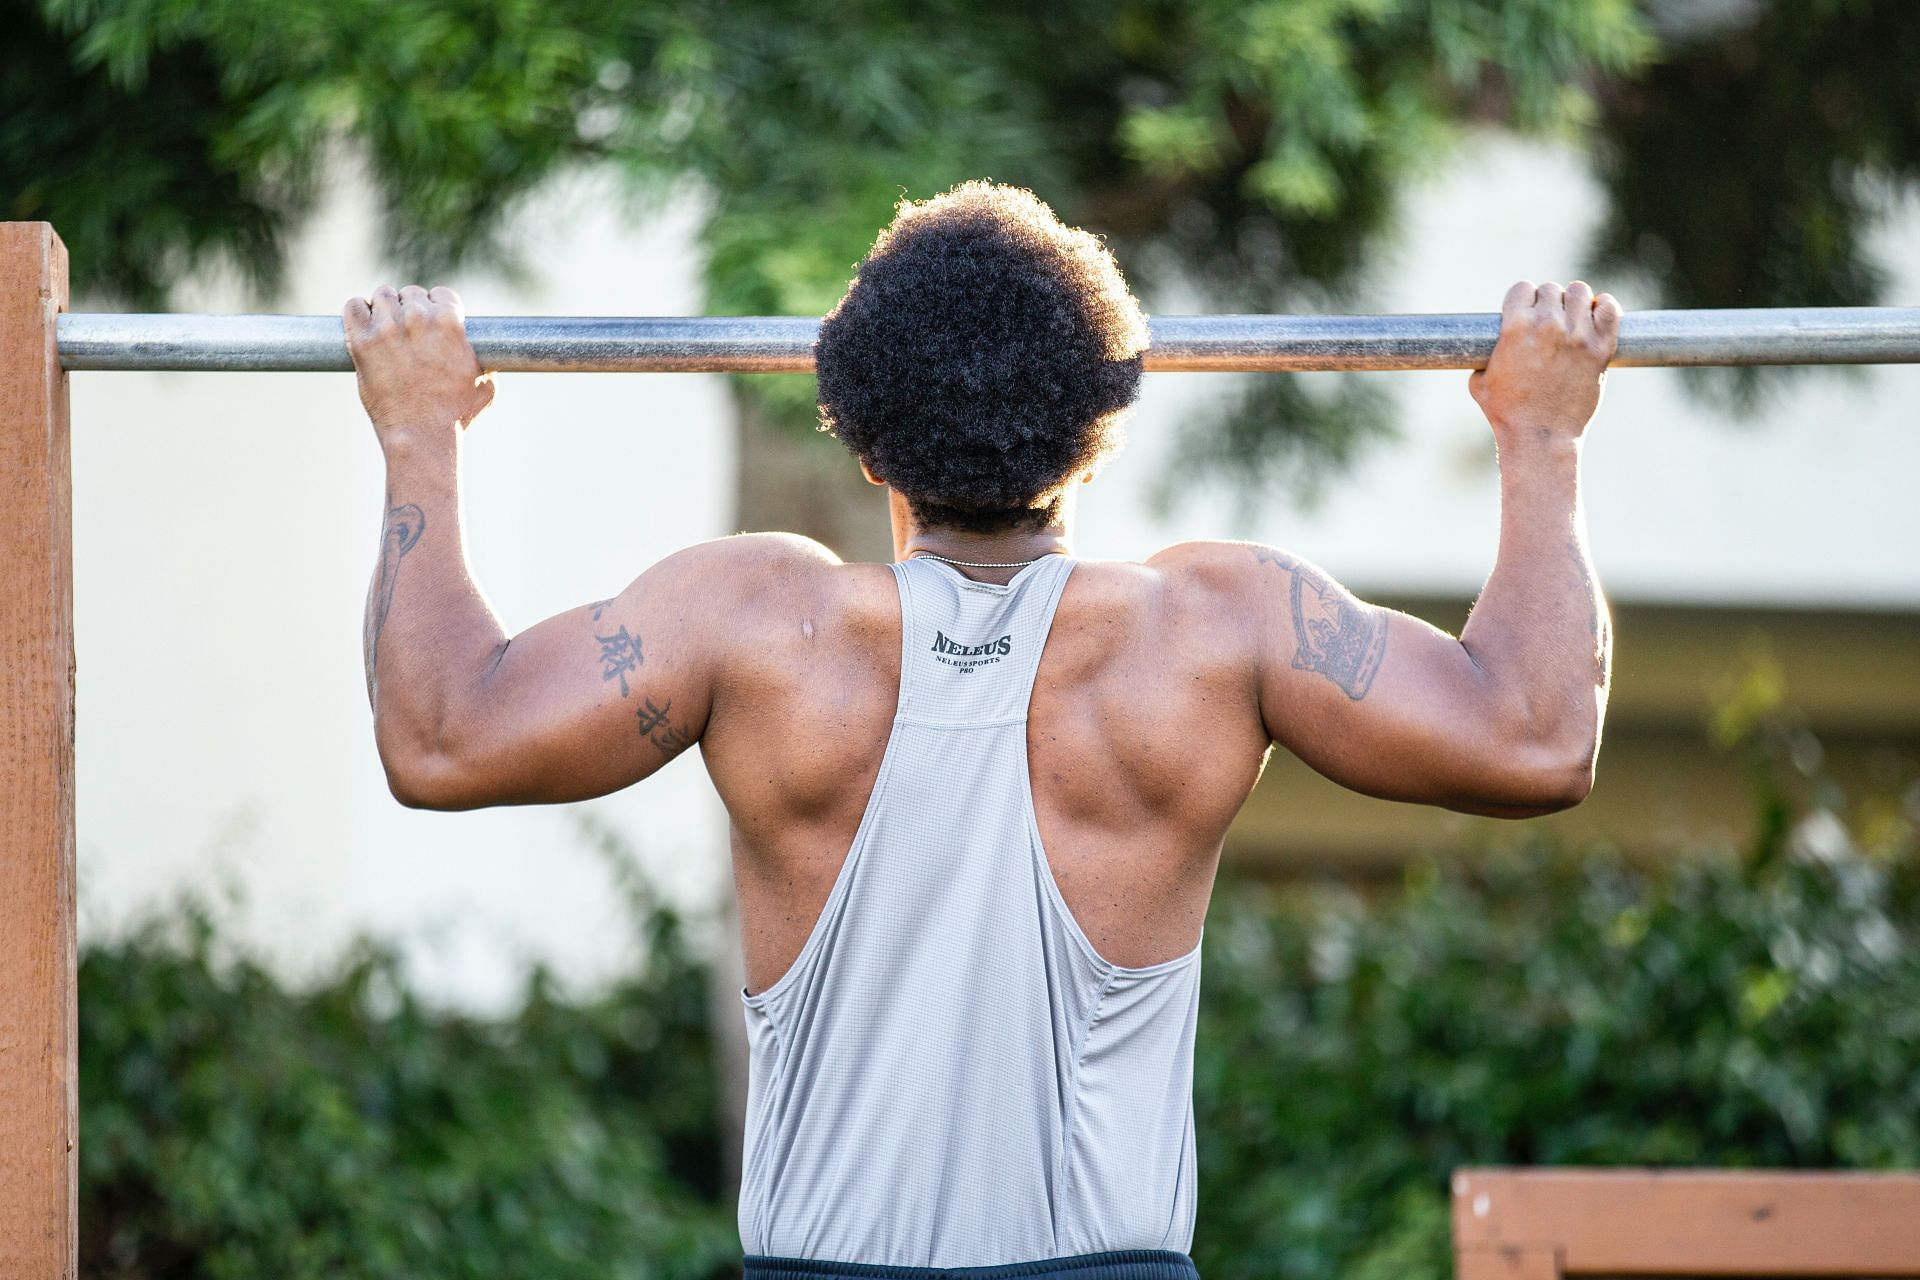 Pull-up bar exercises help in strengthening your arms and back. (Image via Unsplash / Lawrence Crayton)